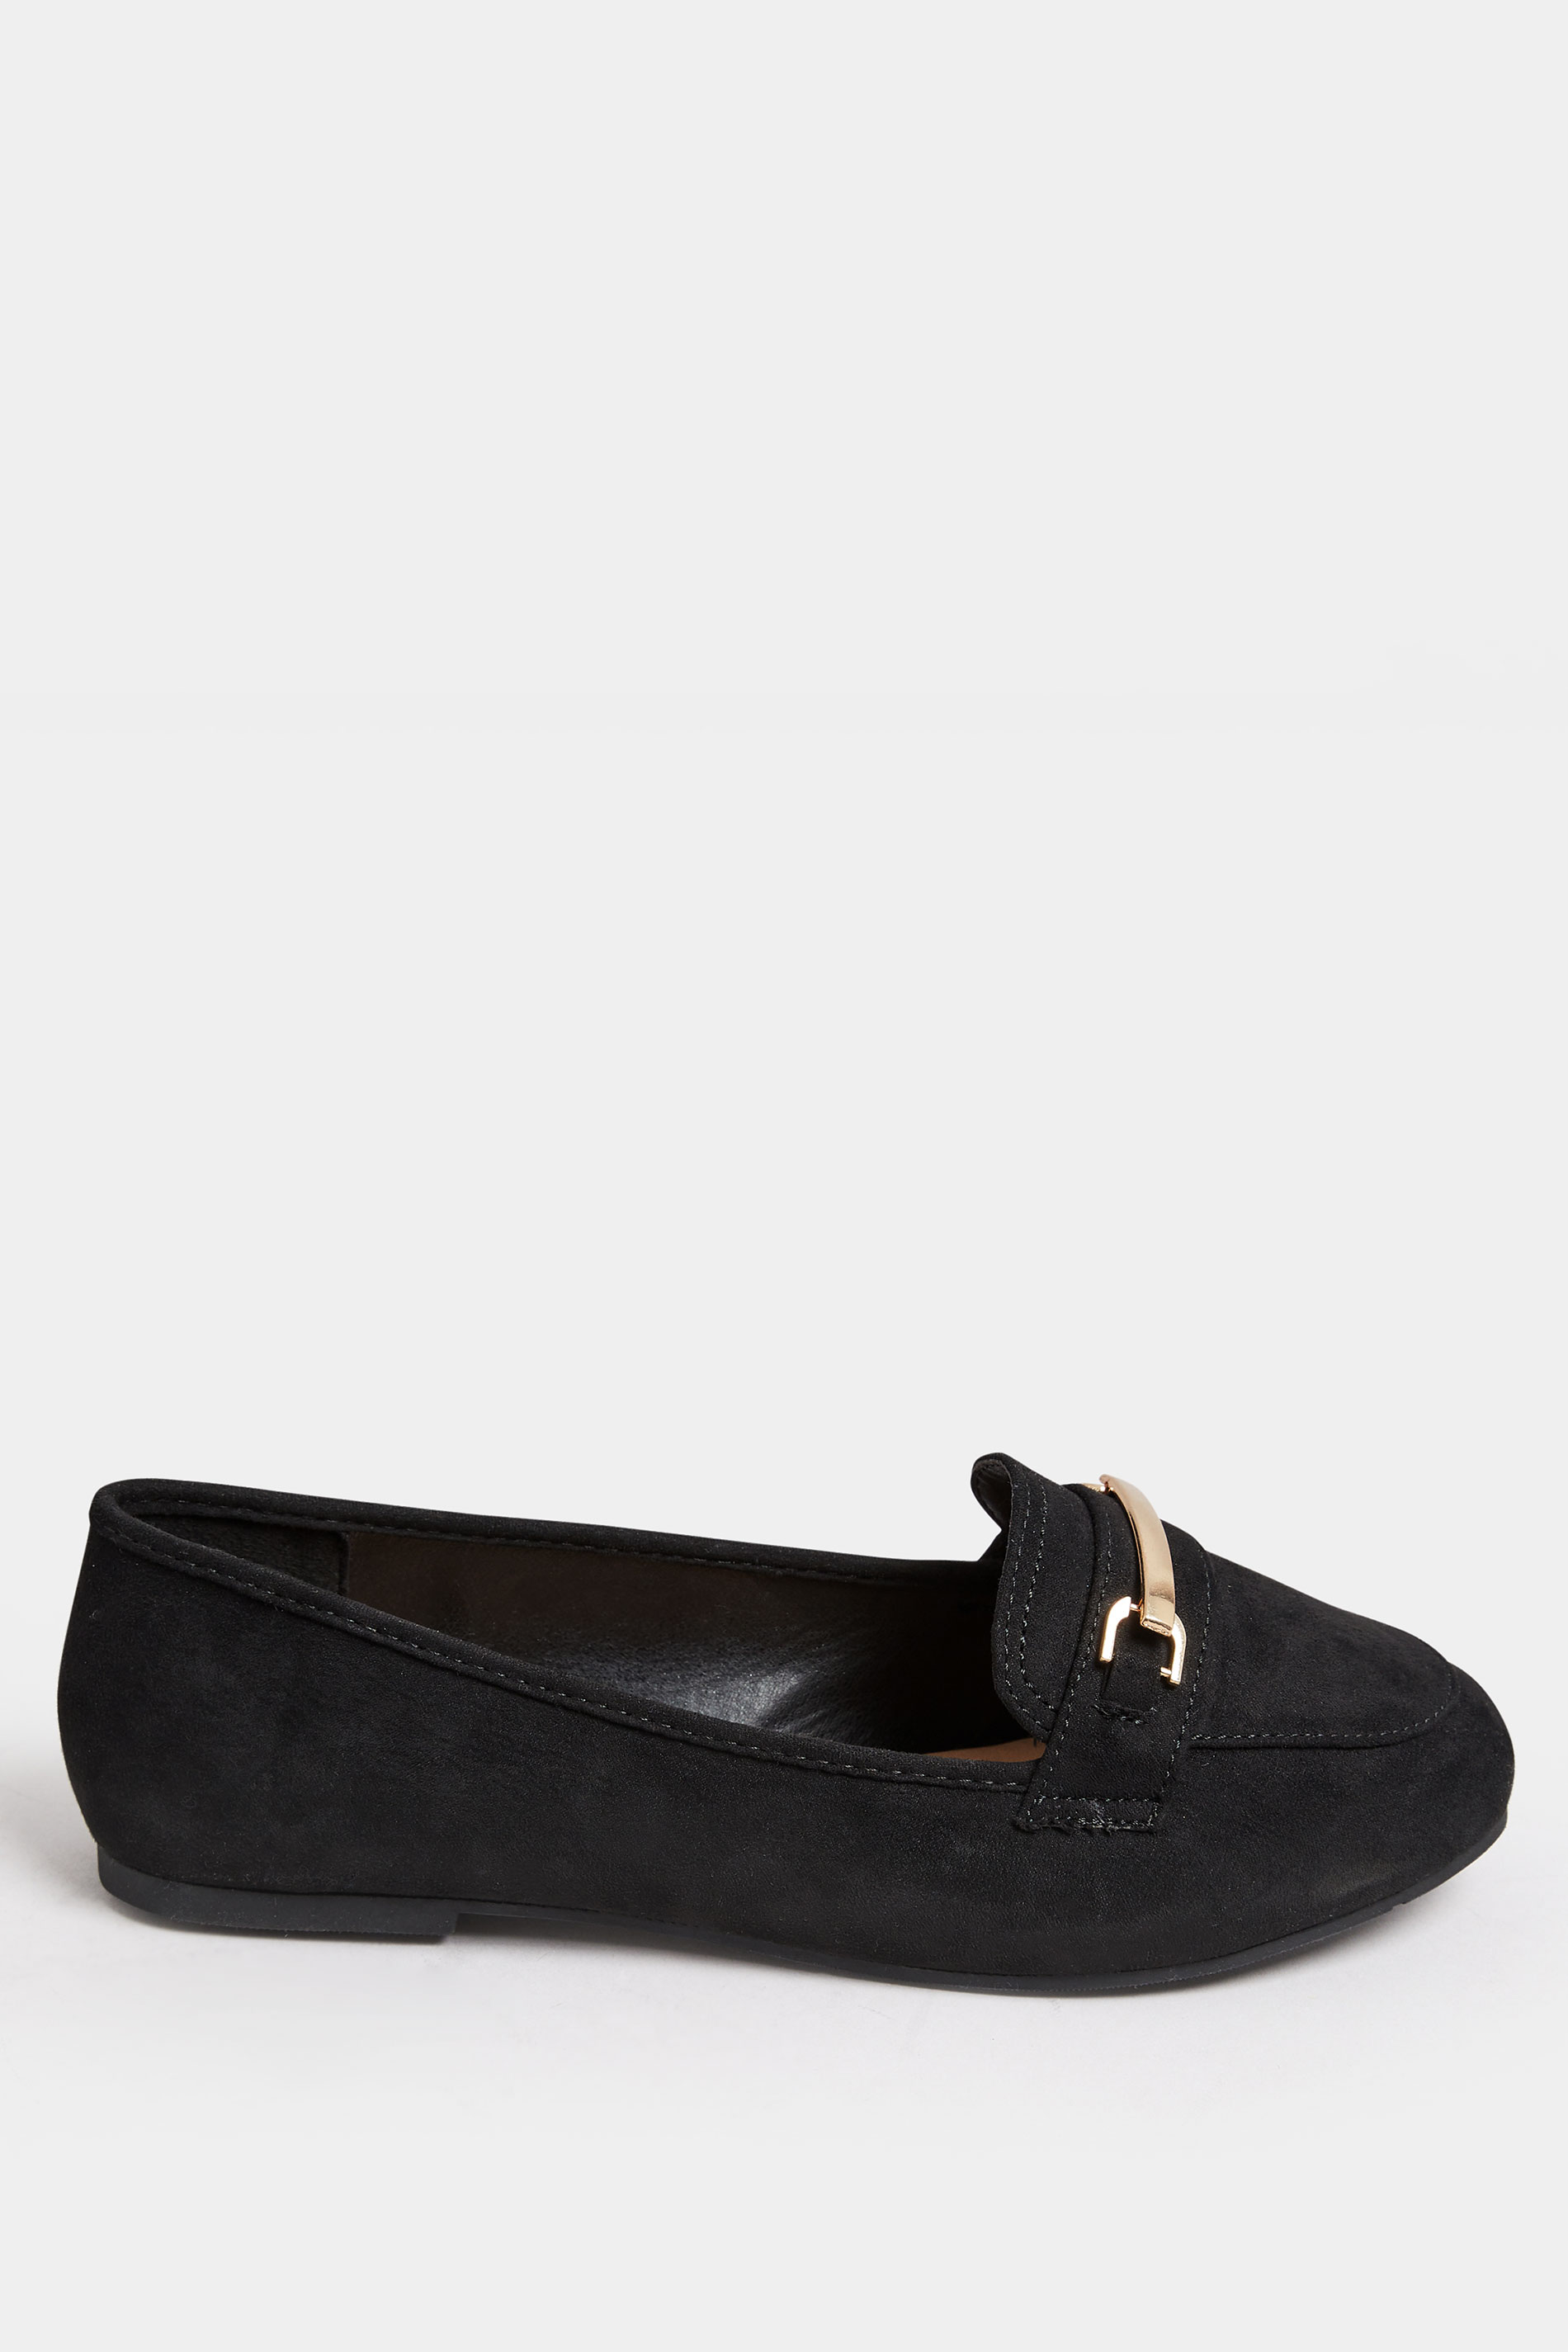 Black Faux Suede Buckle Loafers In Extra Wide EEE Fit | Yours Clothing 3